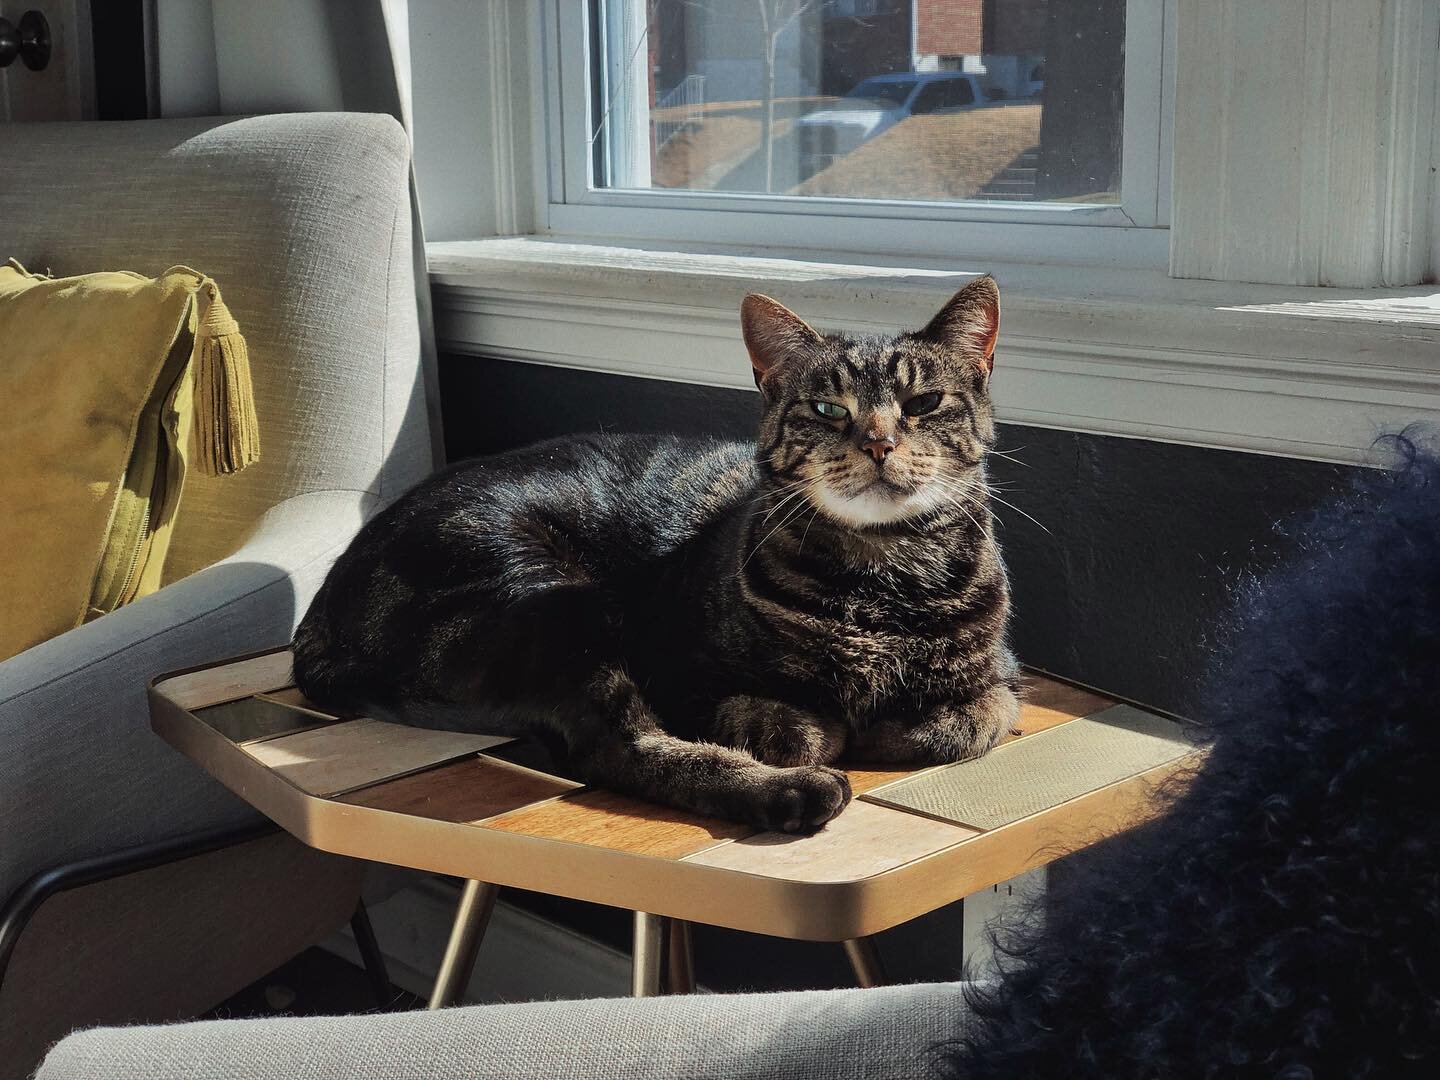 Which photo do you like more.. photo 1 of our cat Louis looking at the camera or photo 2 when he's looking off into the distance? 

Also, this is not how @racheldyann16 and I thought our @roarandrabbit furniture from @westelm would be used but we're 